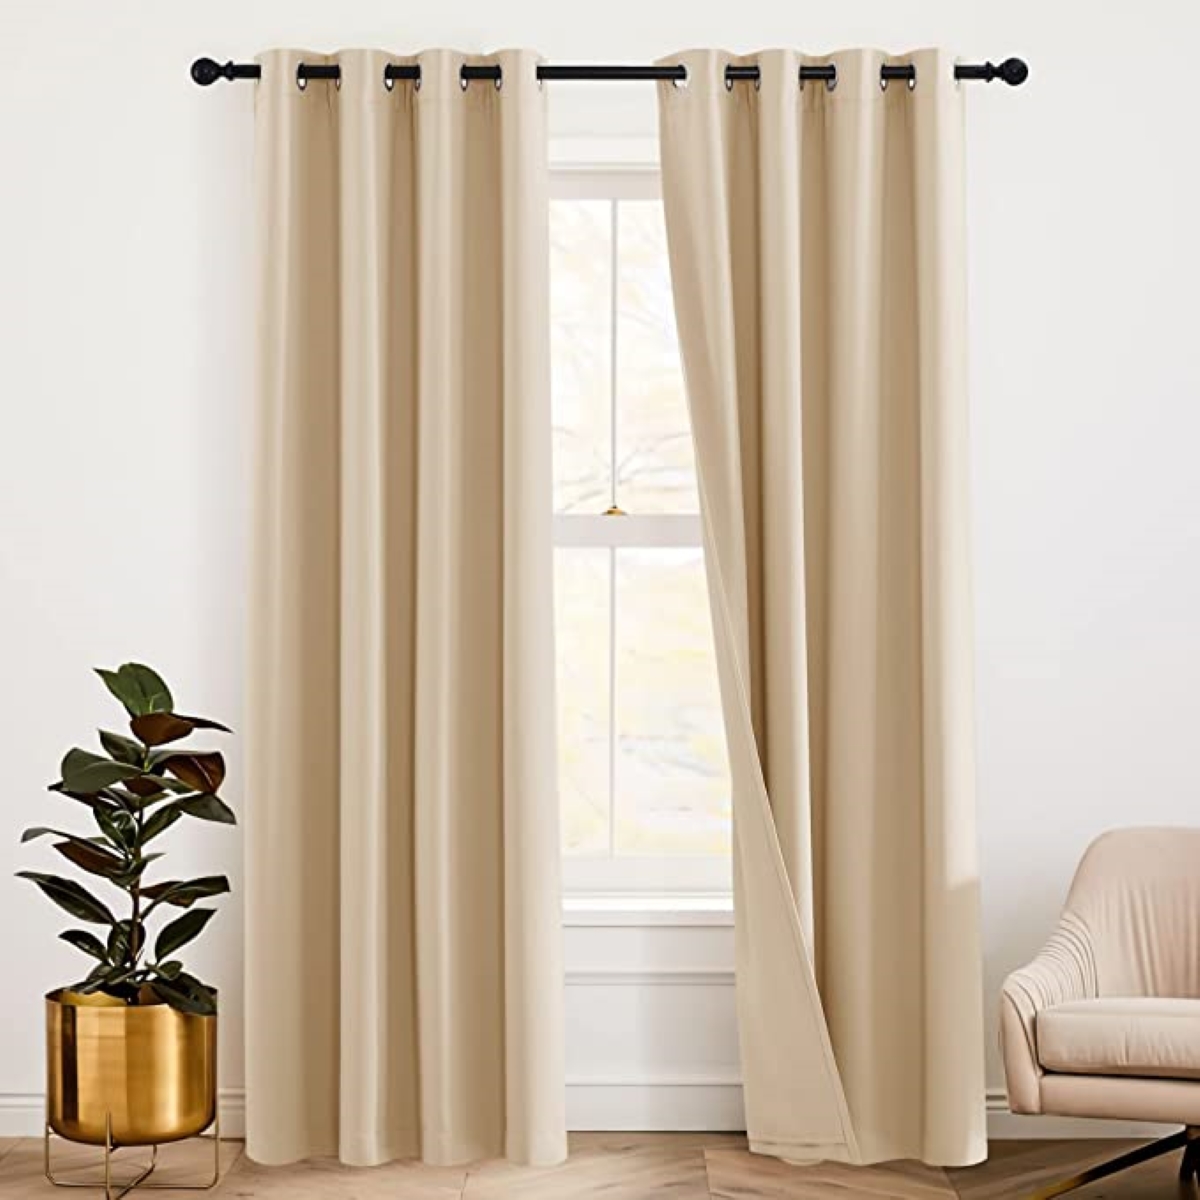 Neutral colored thermal curtains